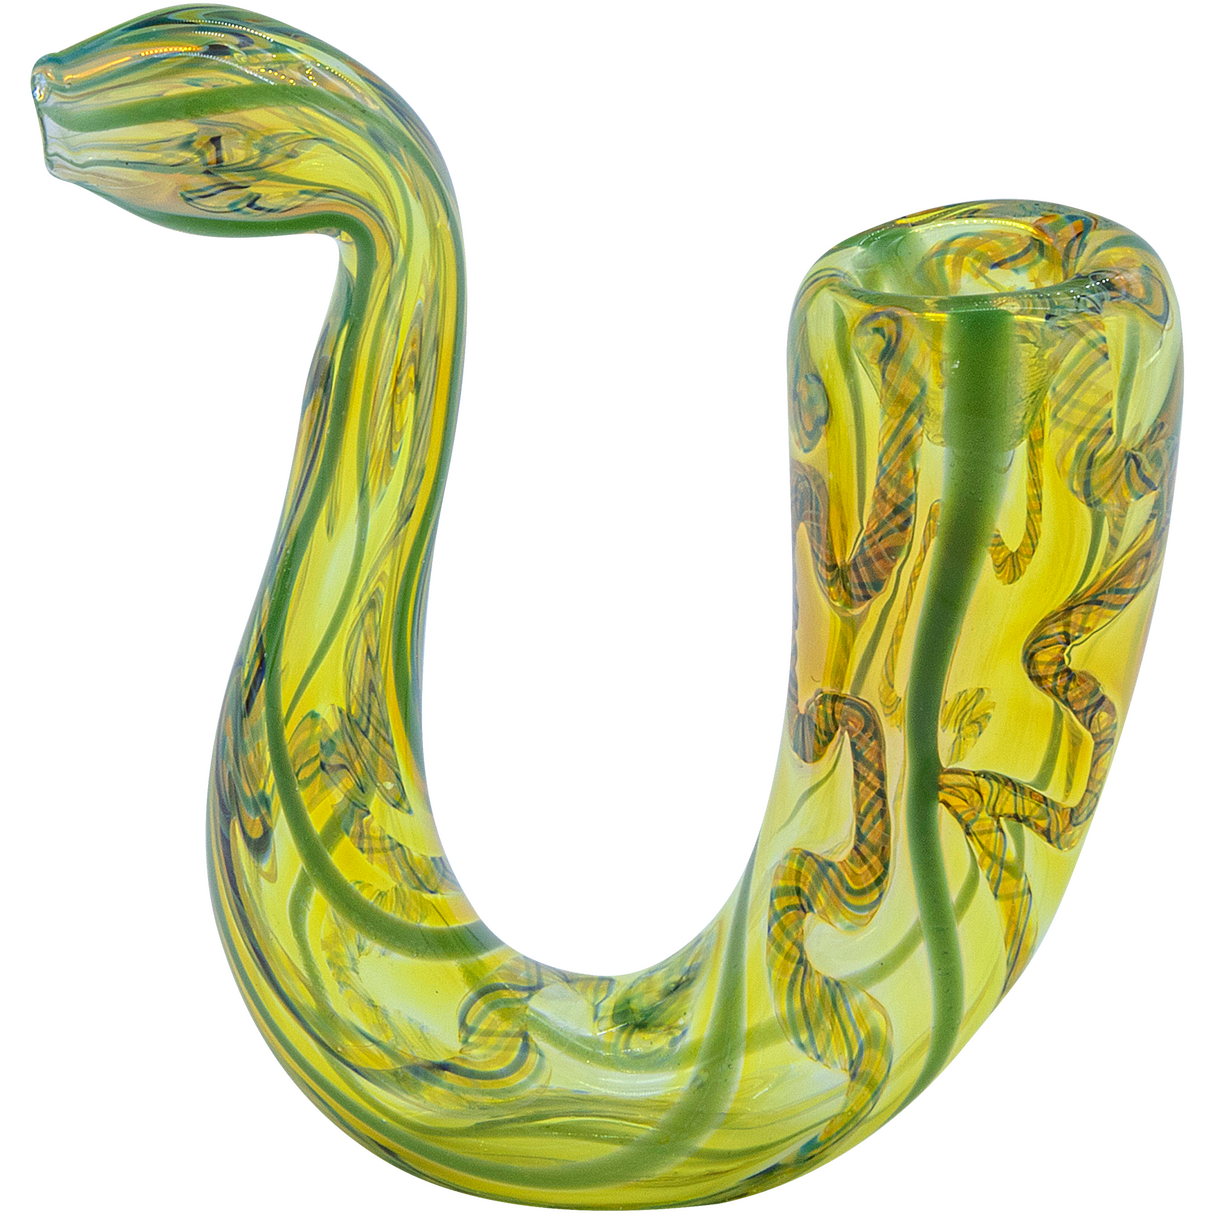 LA Pipes "Gentleman's Sherlock" Pipe in Green Hues, Fumed Color Changing Borosilicate Glass